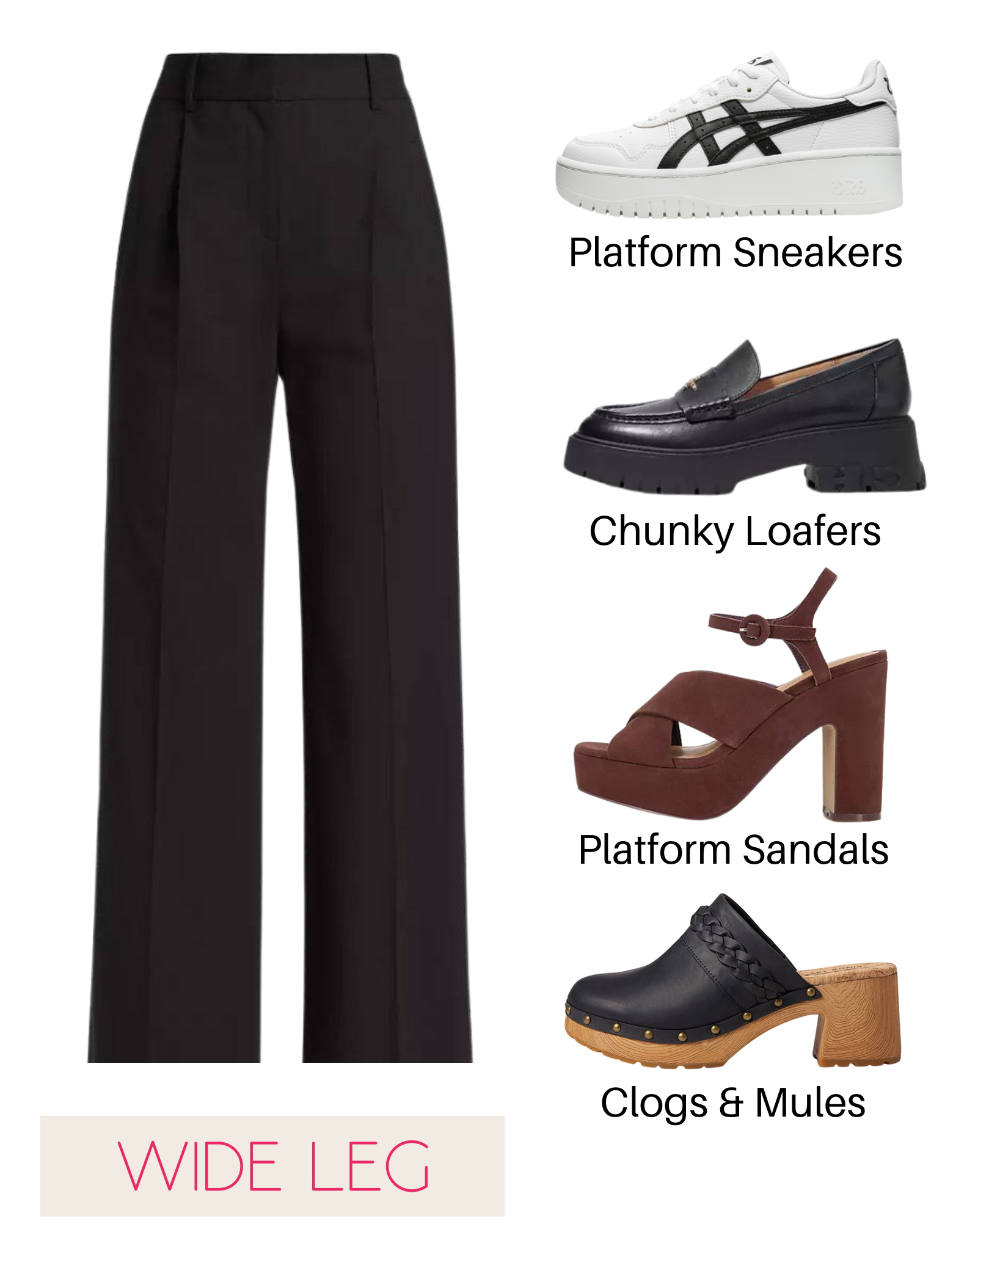 Collage of black wide leg dress pants with 4 shoes to wear them with.